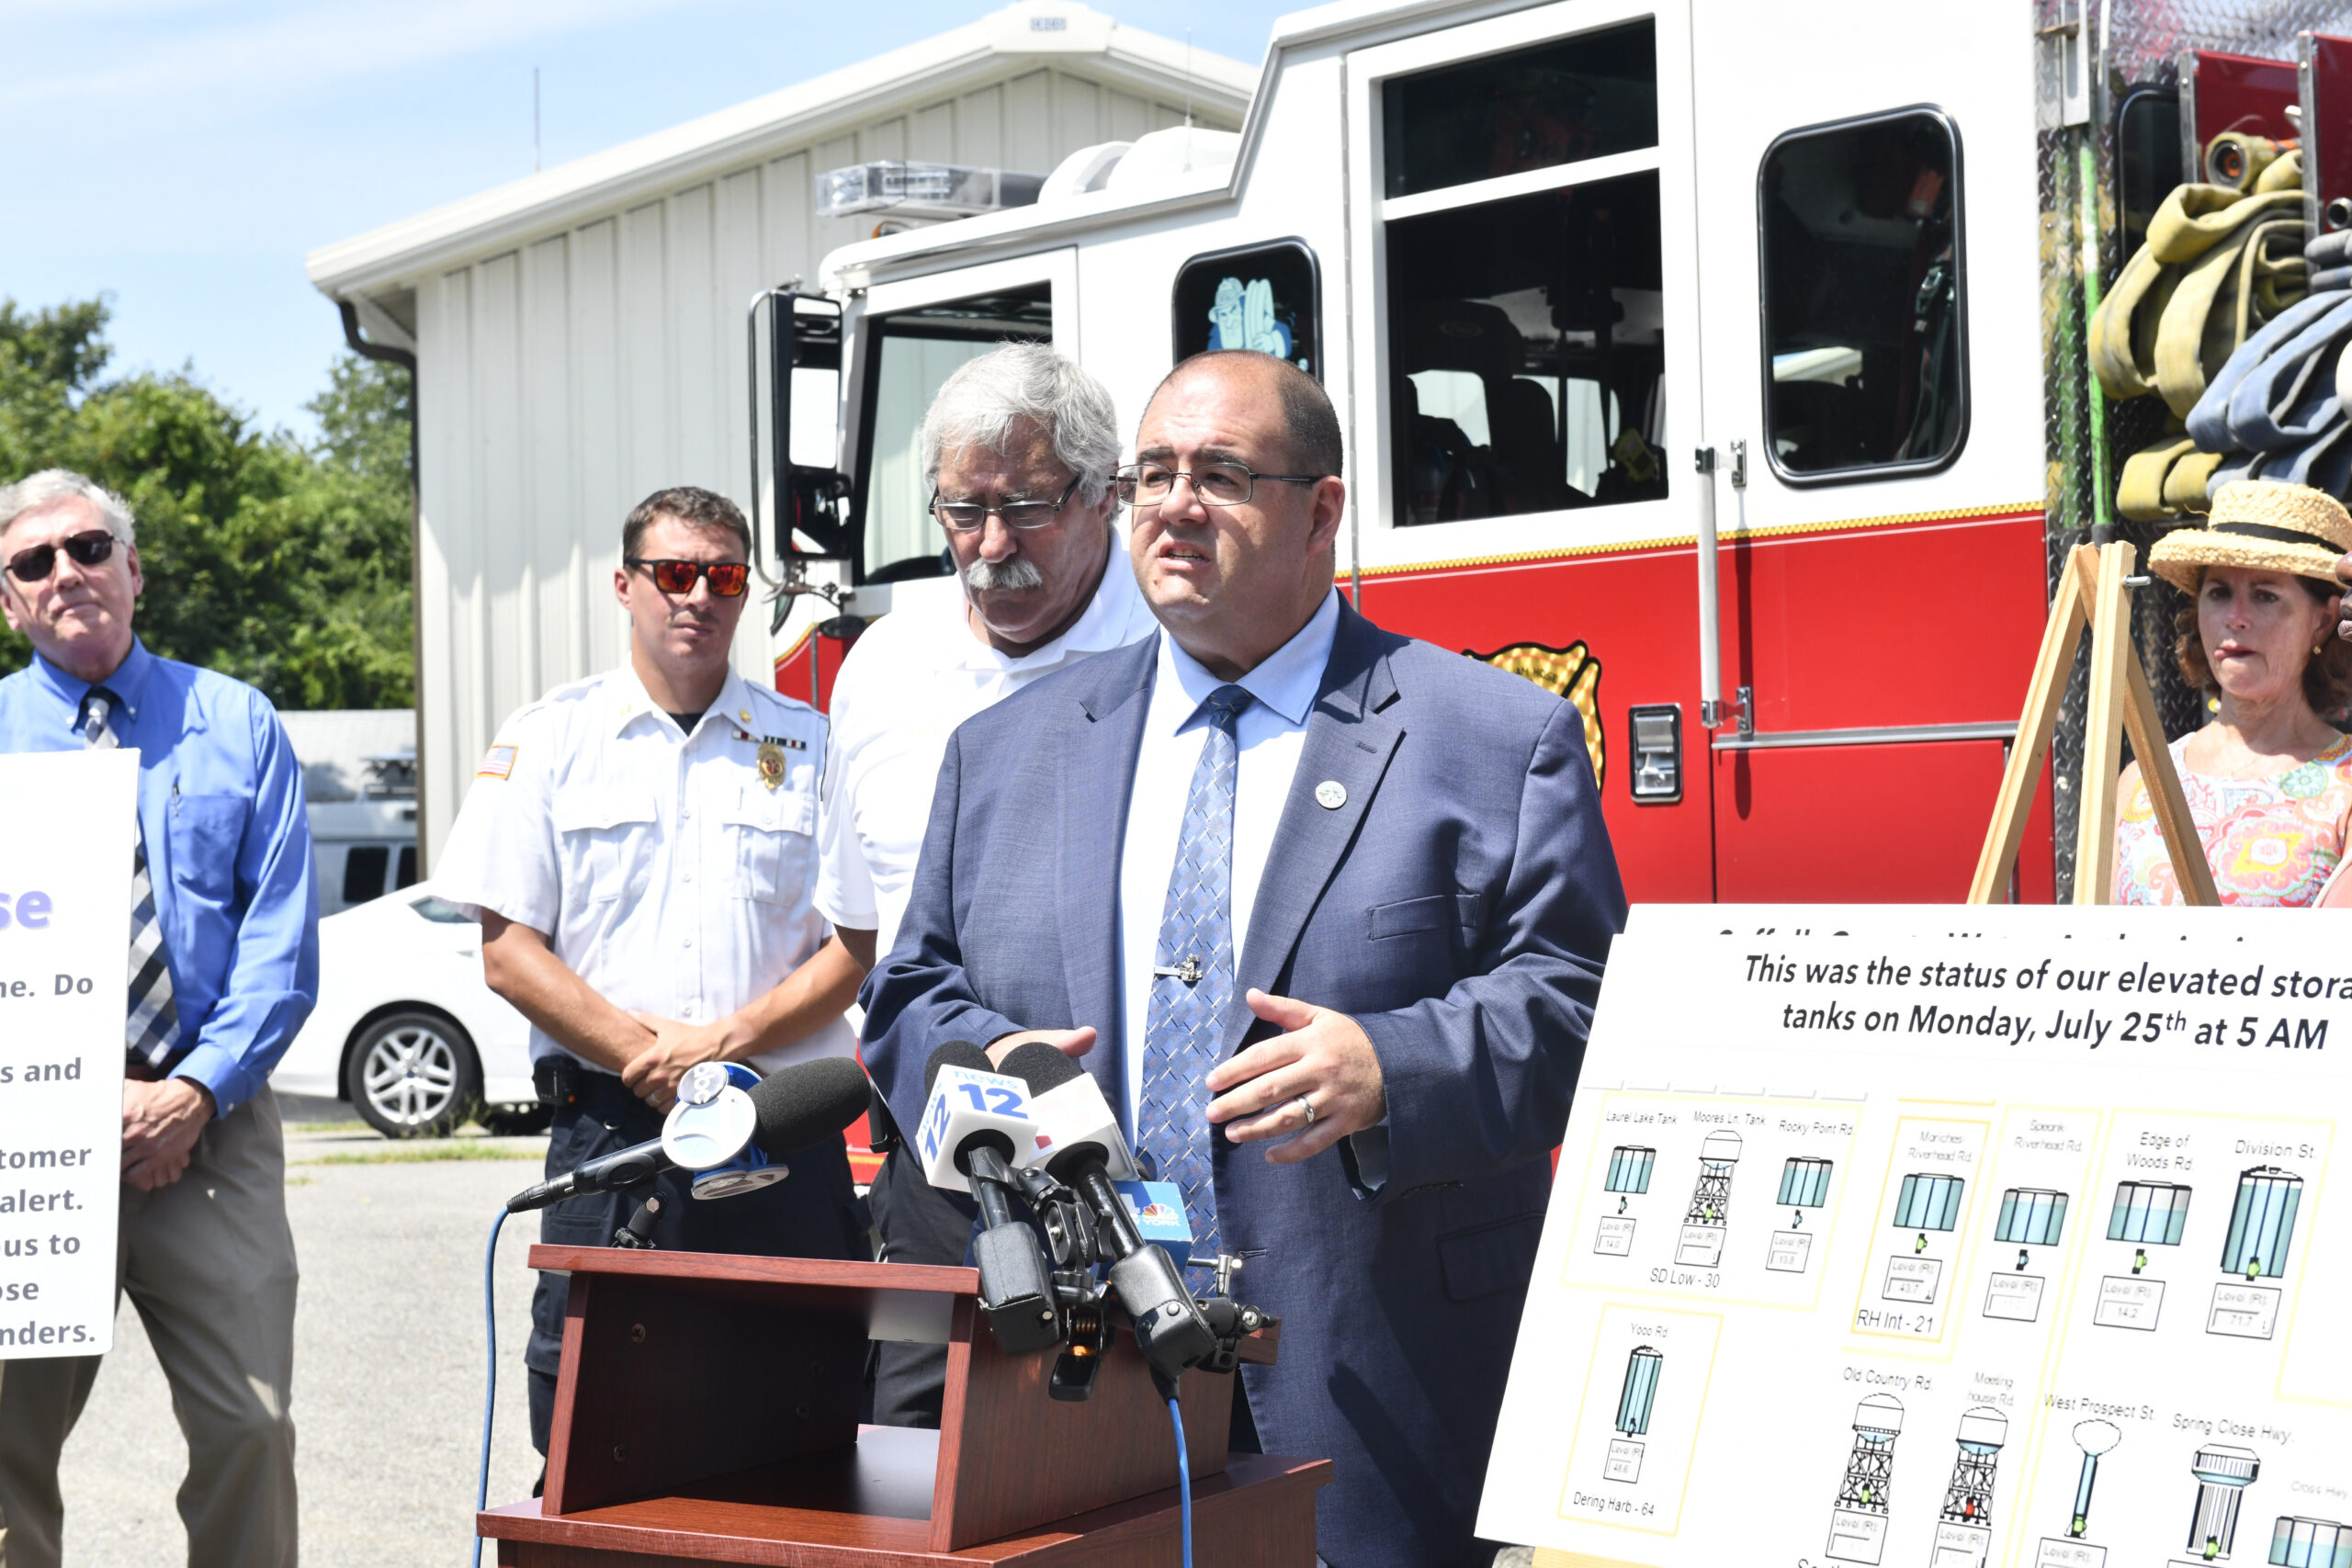 Southampton Town Public Safety Emergency Management Administrator Ryan Murphy at speaks at press conference on Tuesday in Southampton Village.  DANA SHAW